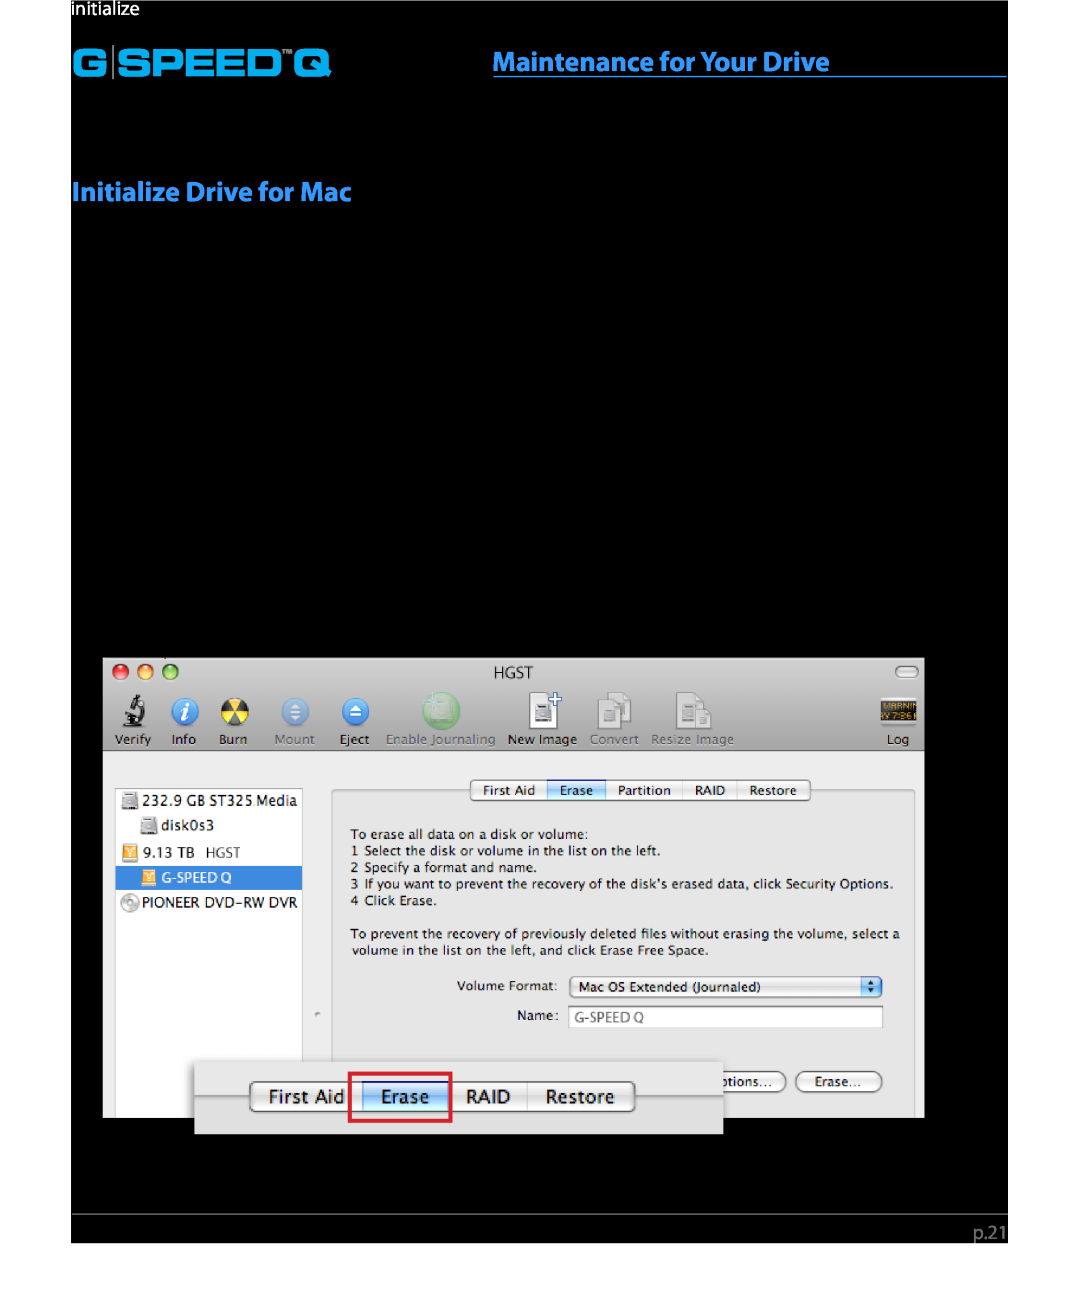 G-Technology 0G02319 manual Initialize Drive for Mac, Maintenance for Your Drive, G Speedq 